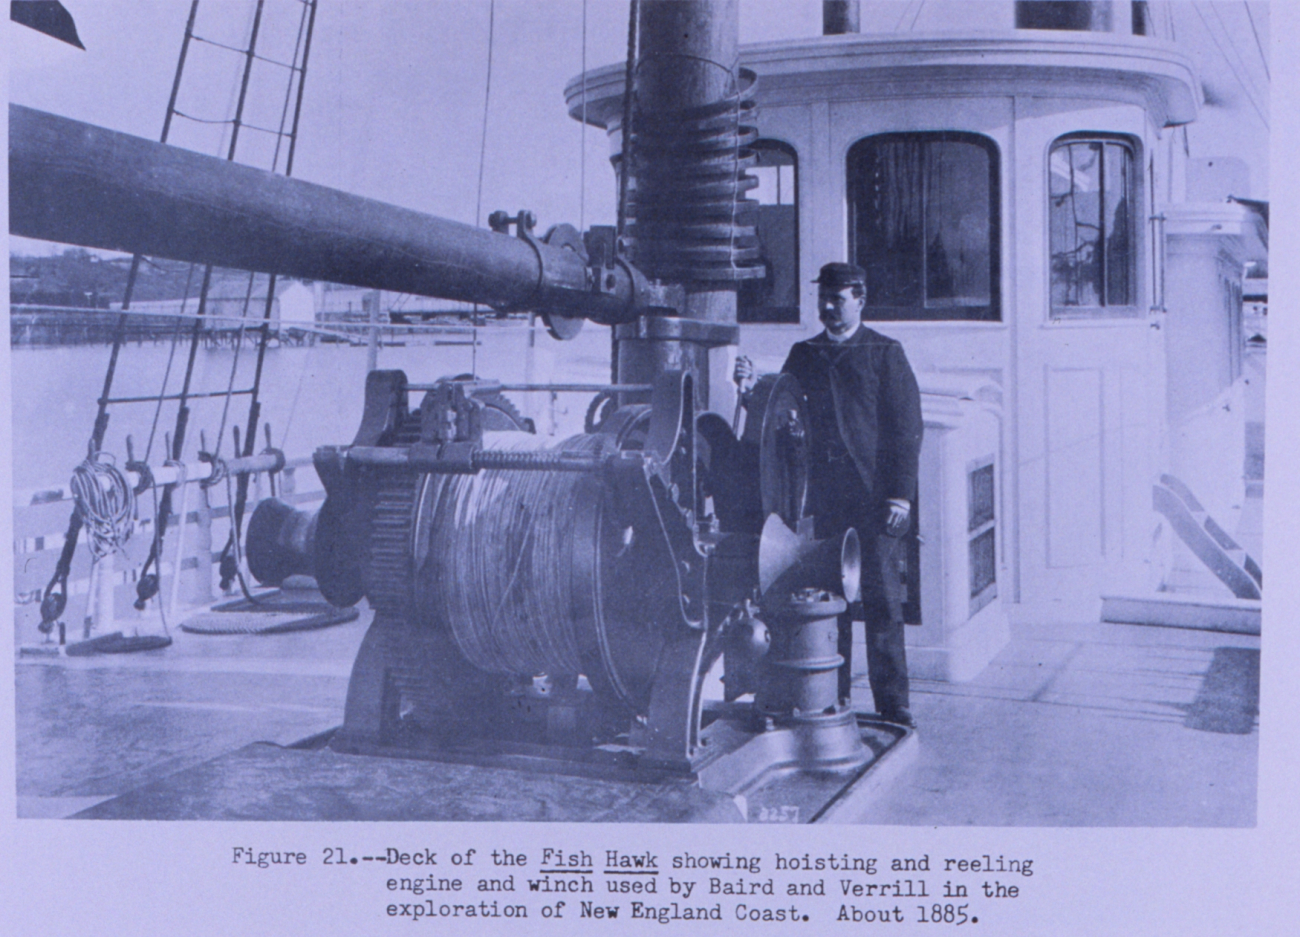 Deck of the FISH HAWK showing hoisting and reeling engine and winch used bySpencer Fullerton Baird and Professor Verrill in the exploration of the NewEngland coast